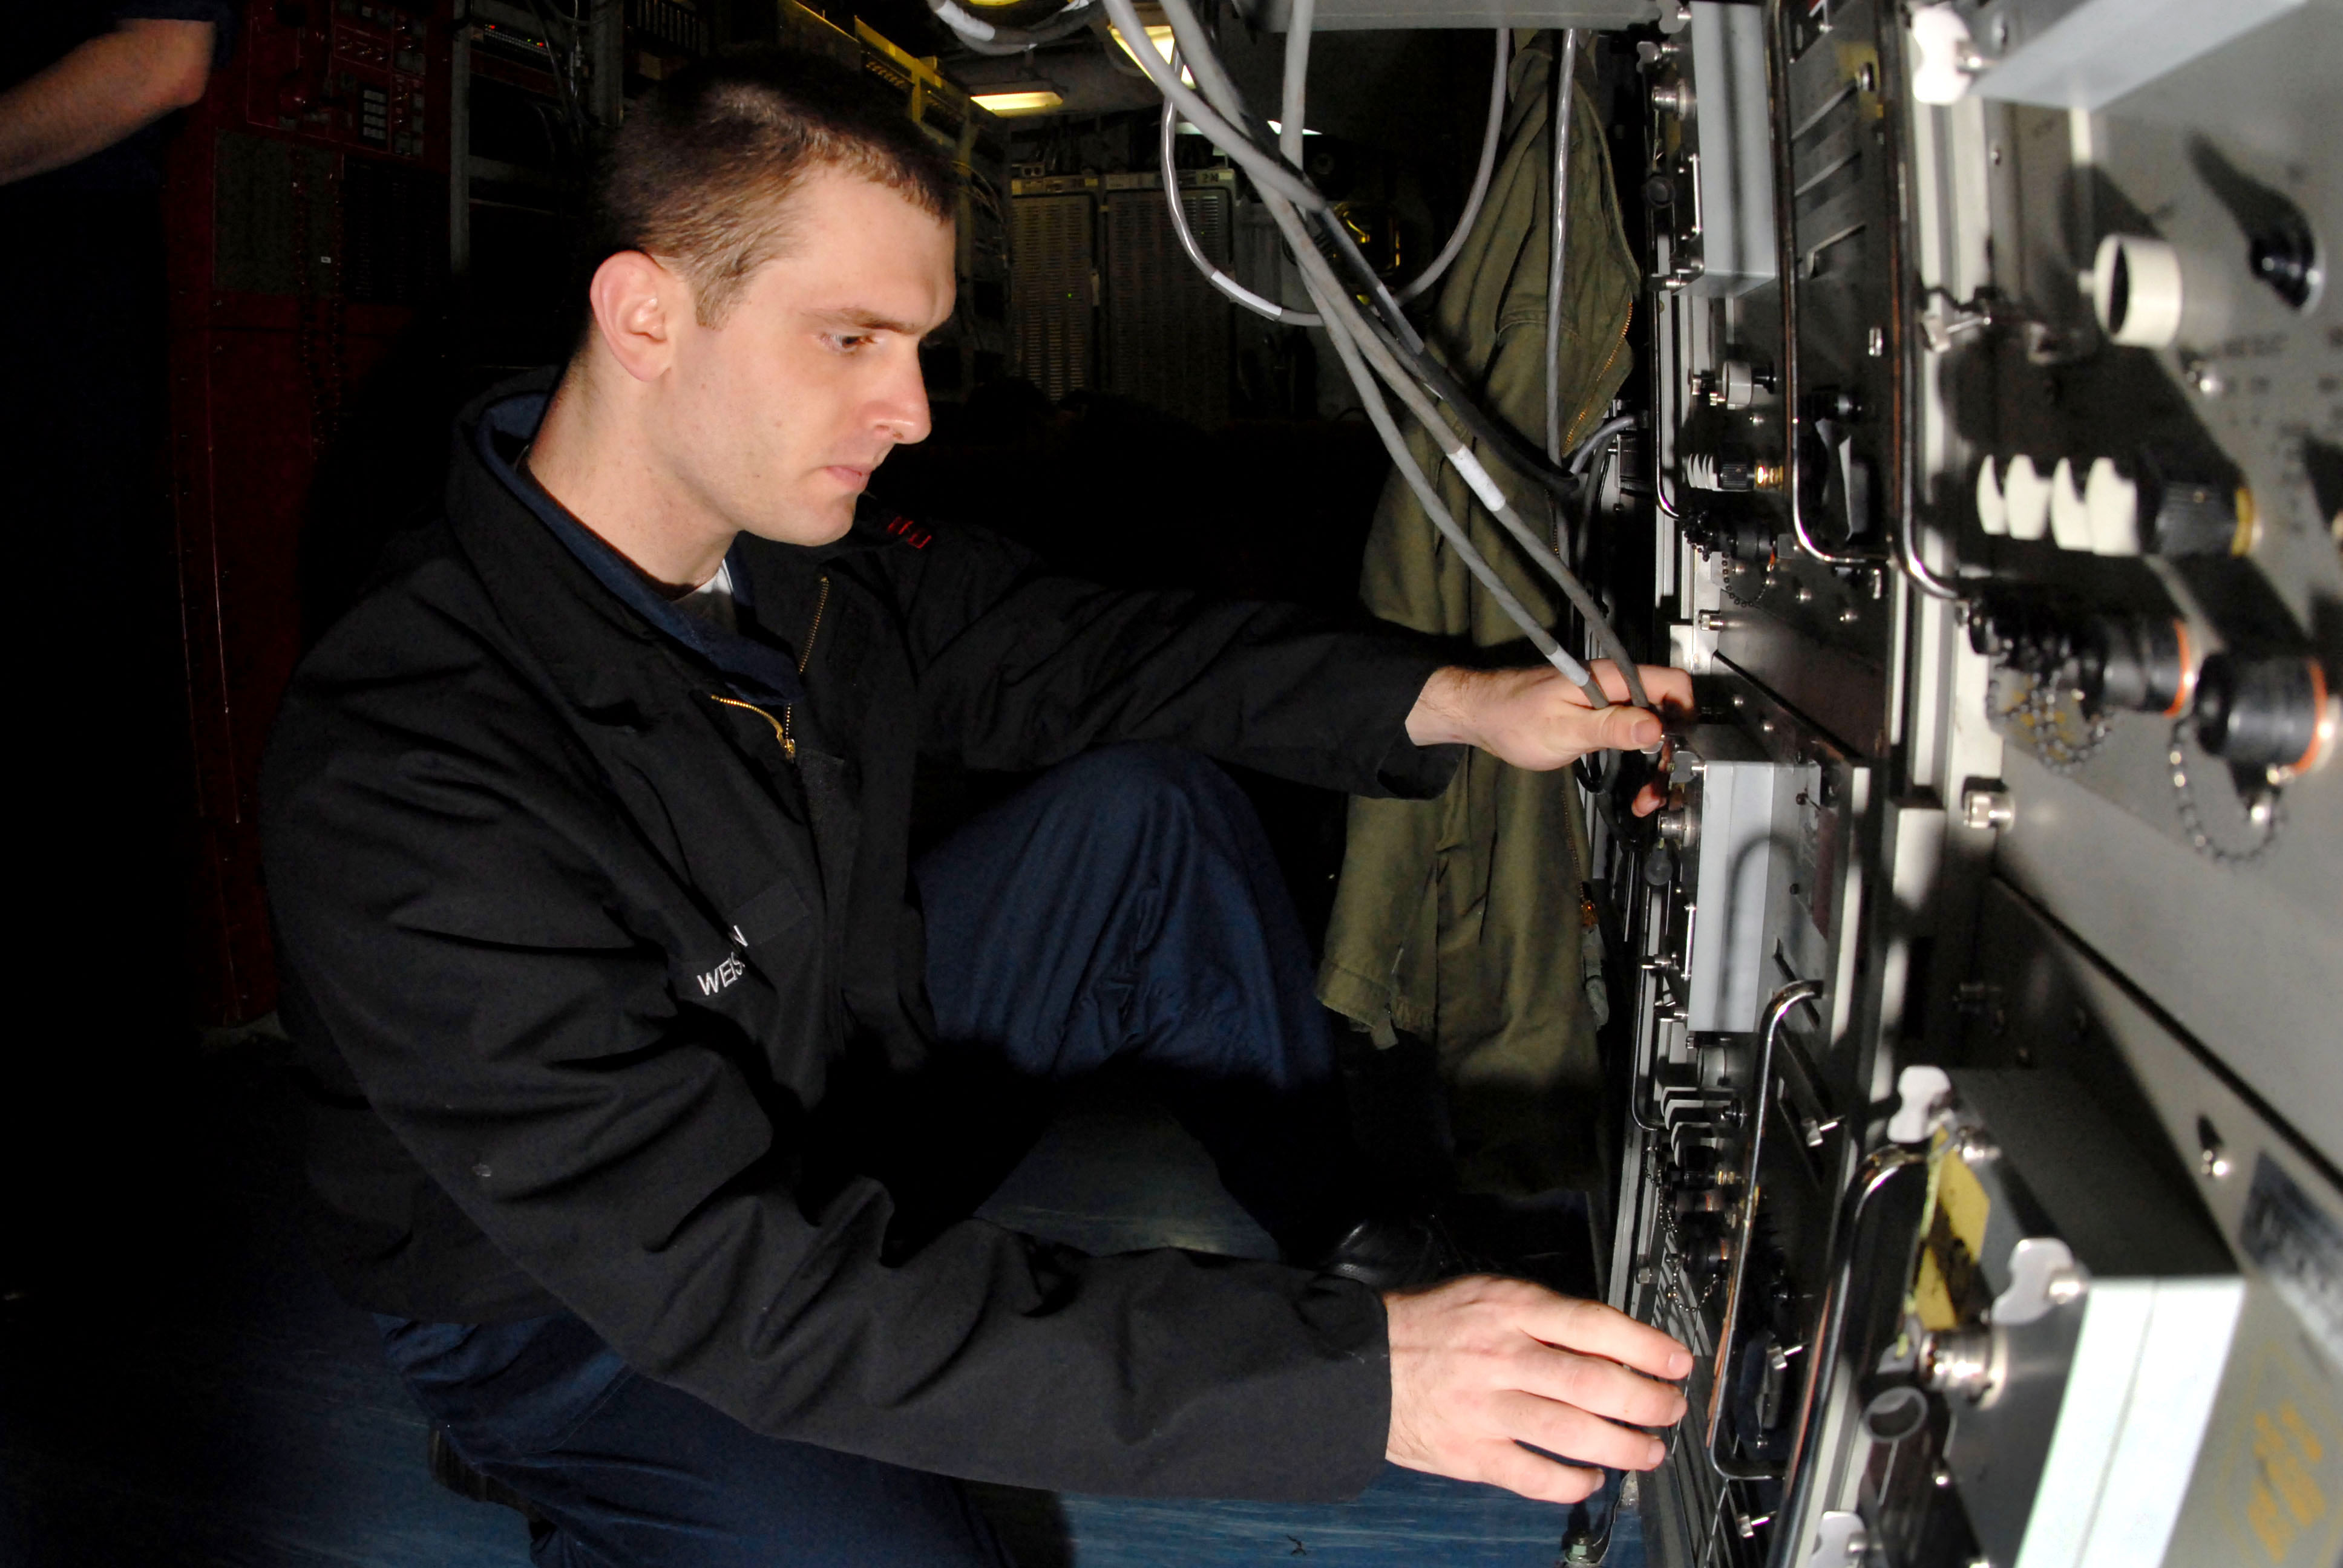 US Navy 070306-N-3038W-086 Information Systems Technician 2nd Class Dan Wiessman, assigned to combat systems department, checks satellite communications for voice networks aboard Nimitz-class aircraft carrier USS John C. Stenni